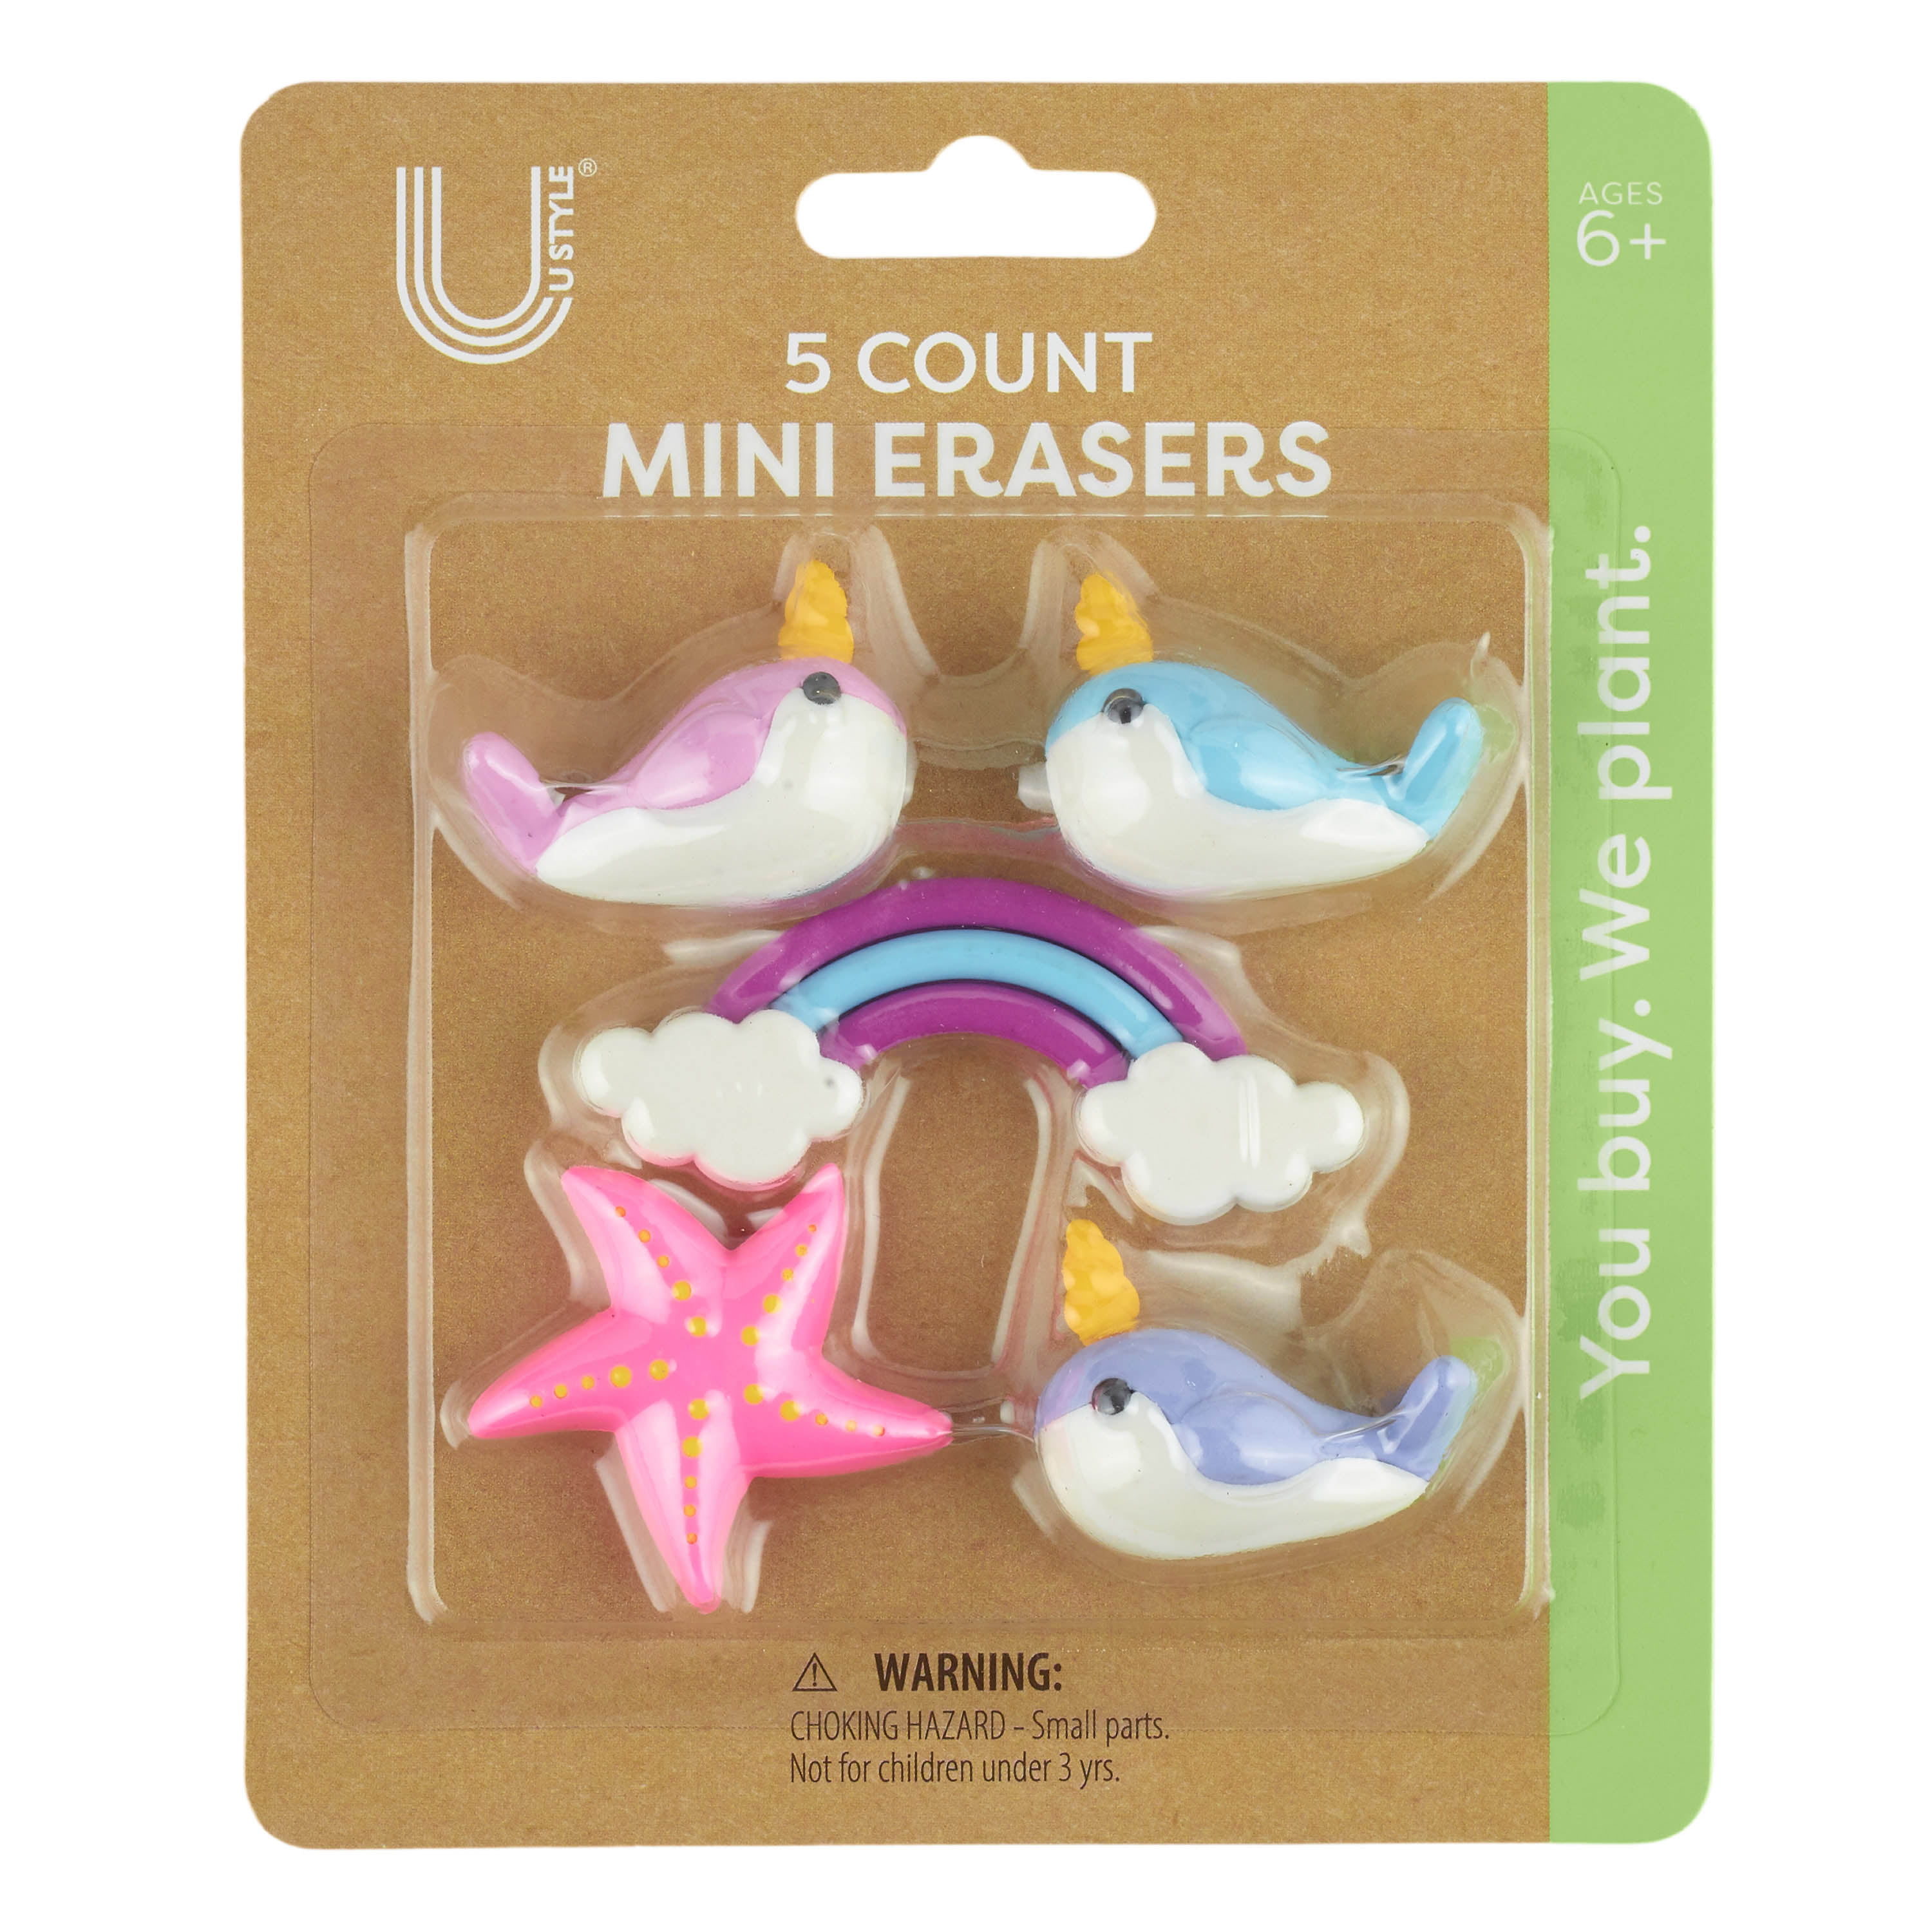 FunErasers-Mini Number Erasers (One Set) – FUN ERASERS